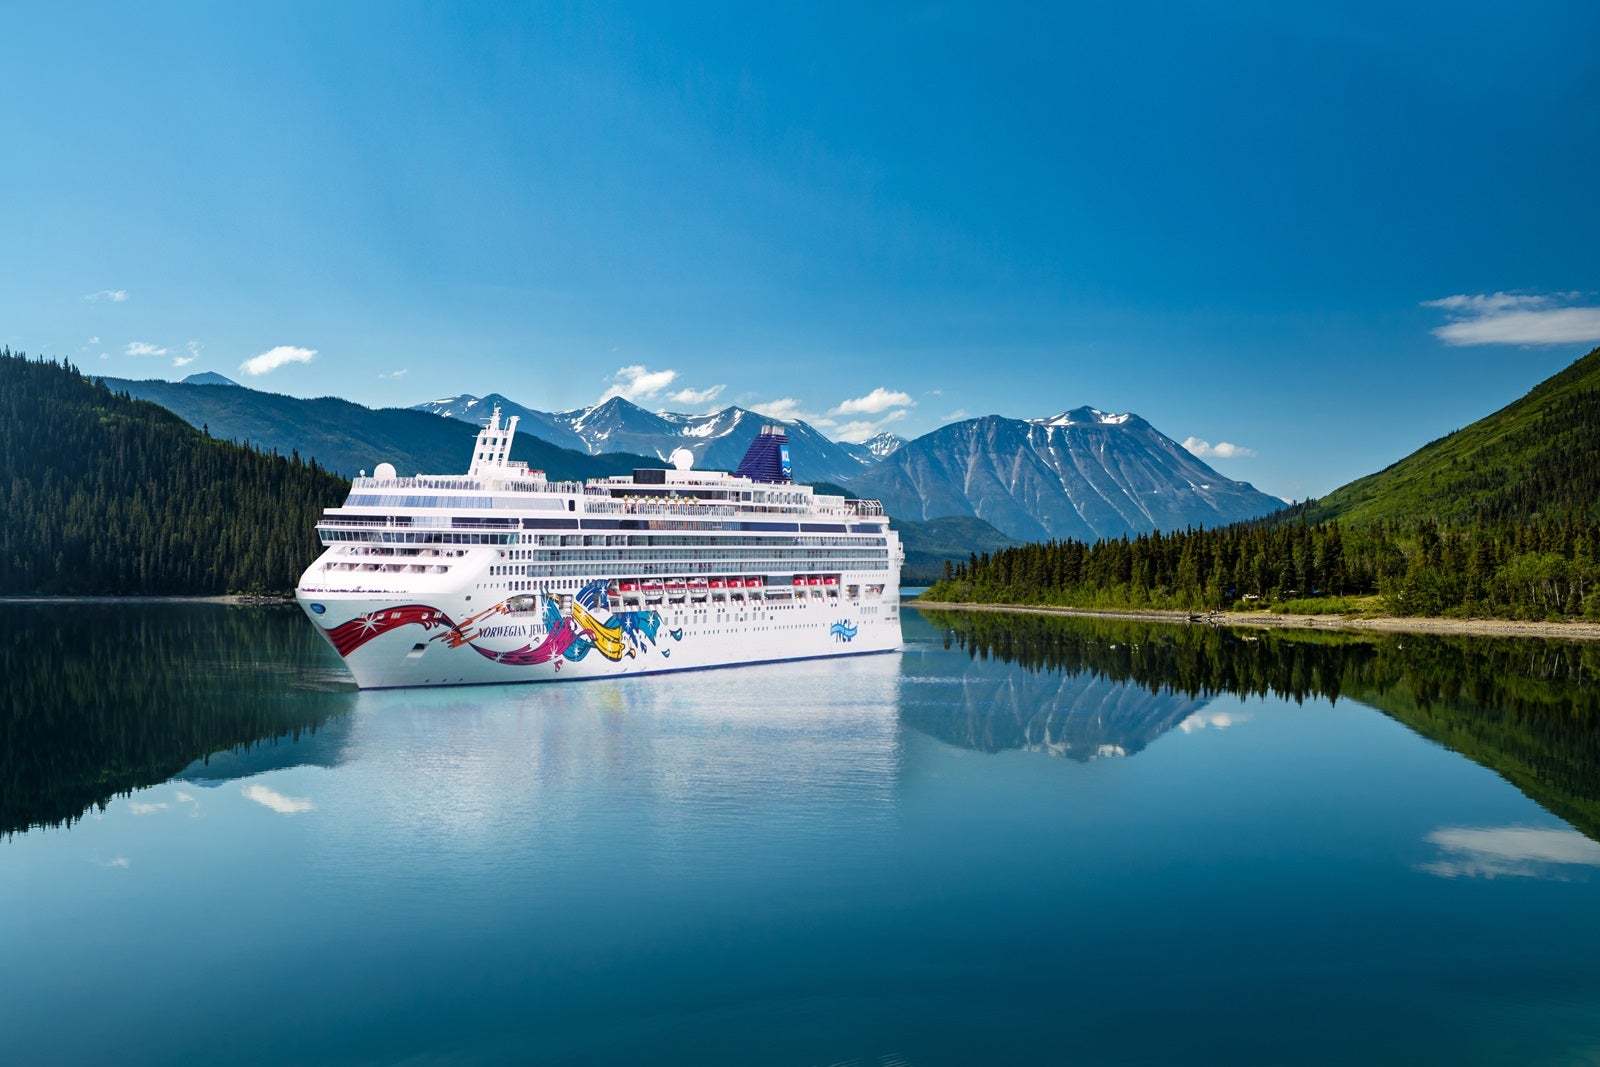 Norwegian Cruise Line takes you to bucket checklist locations with unmatched flexibility and worth